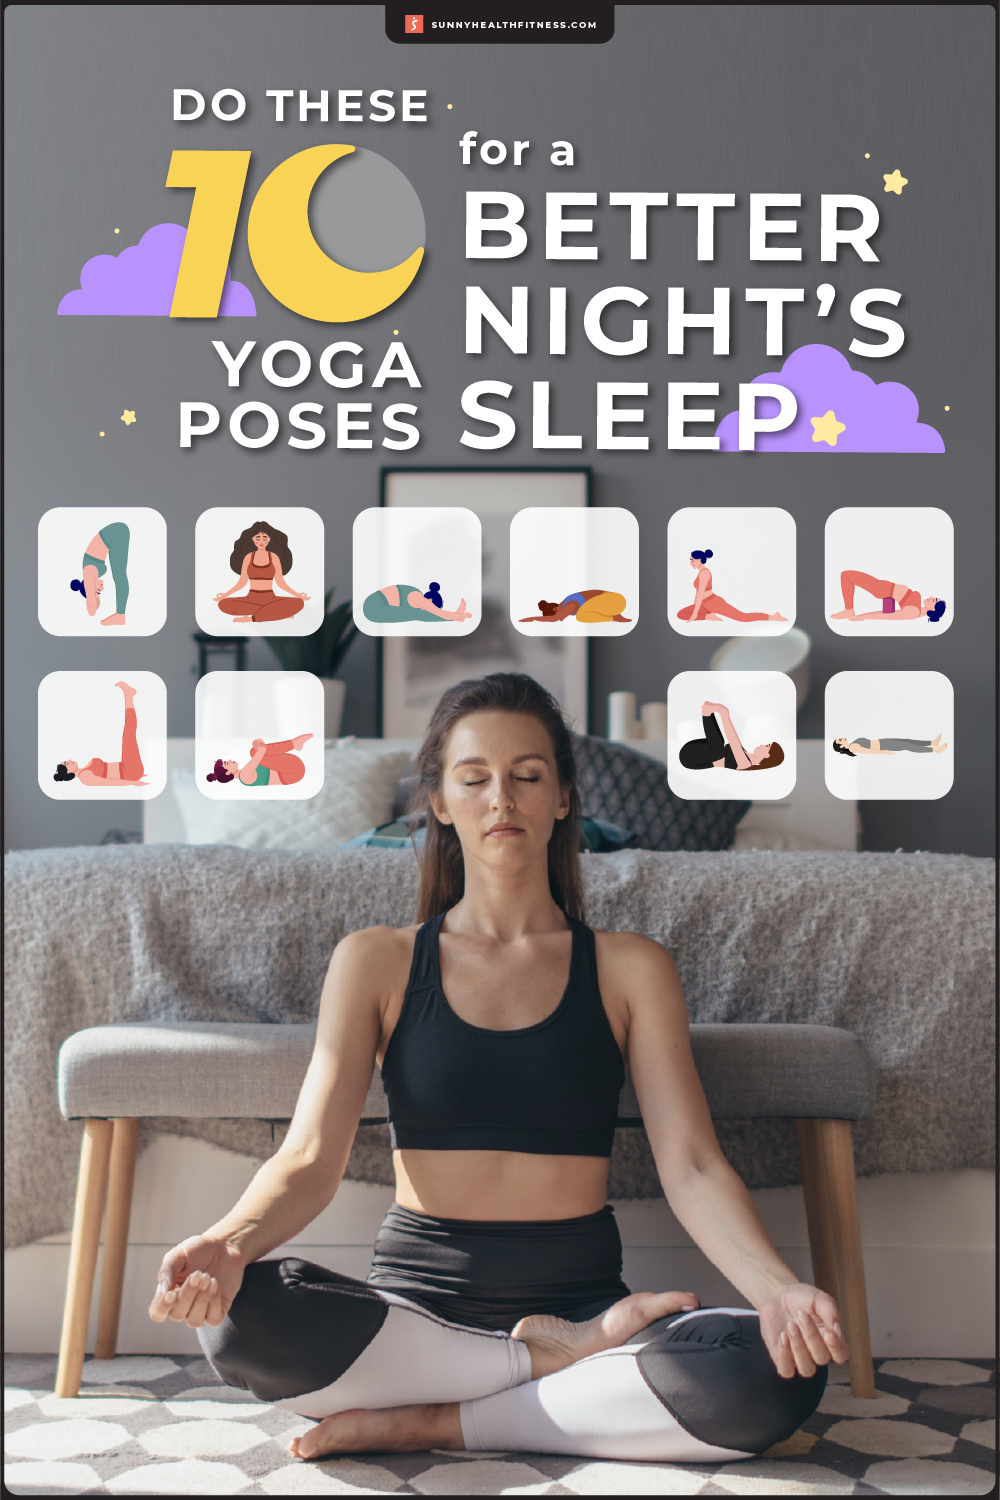 10 Yoga Poses Before Bed for a Better Night’s Sleep Infographic